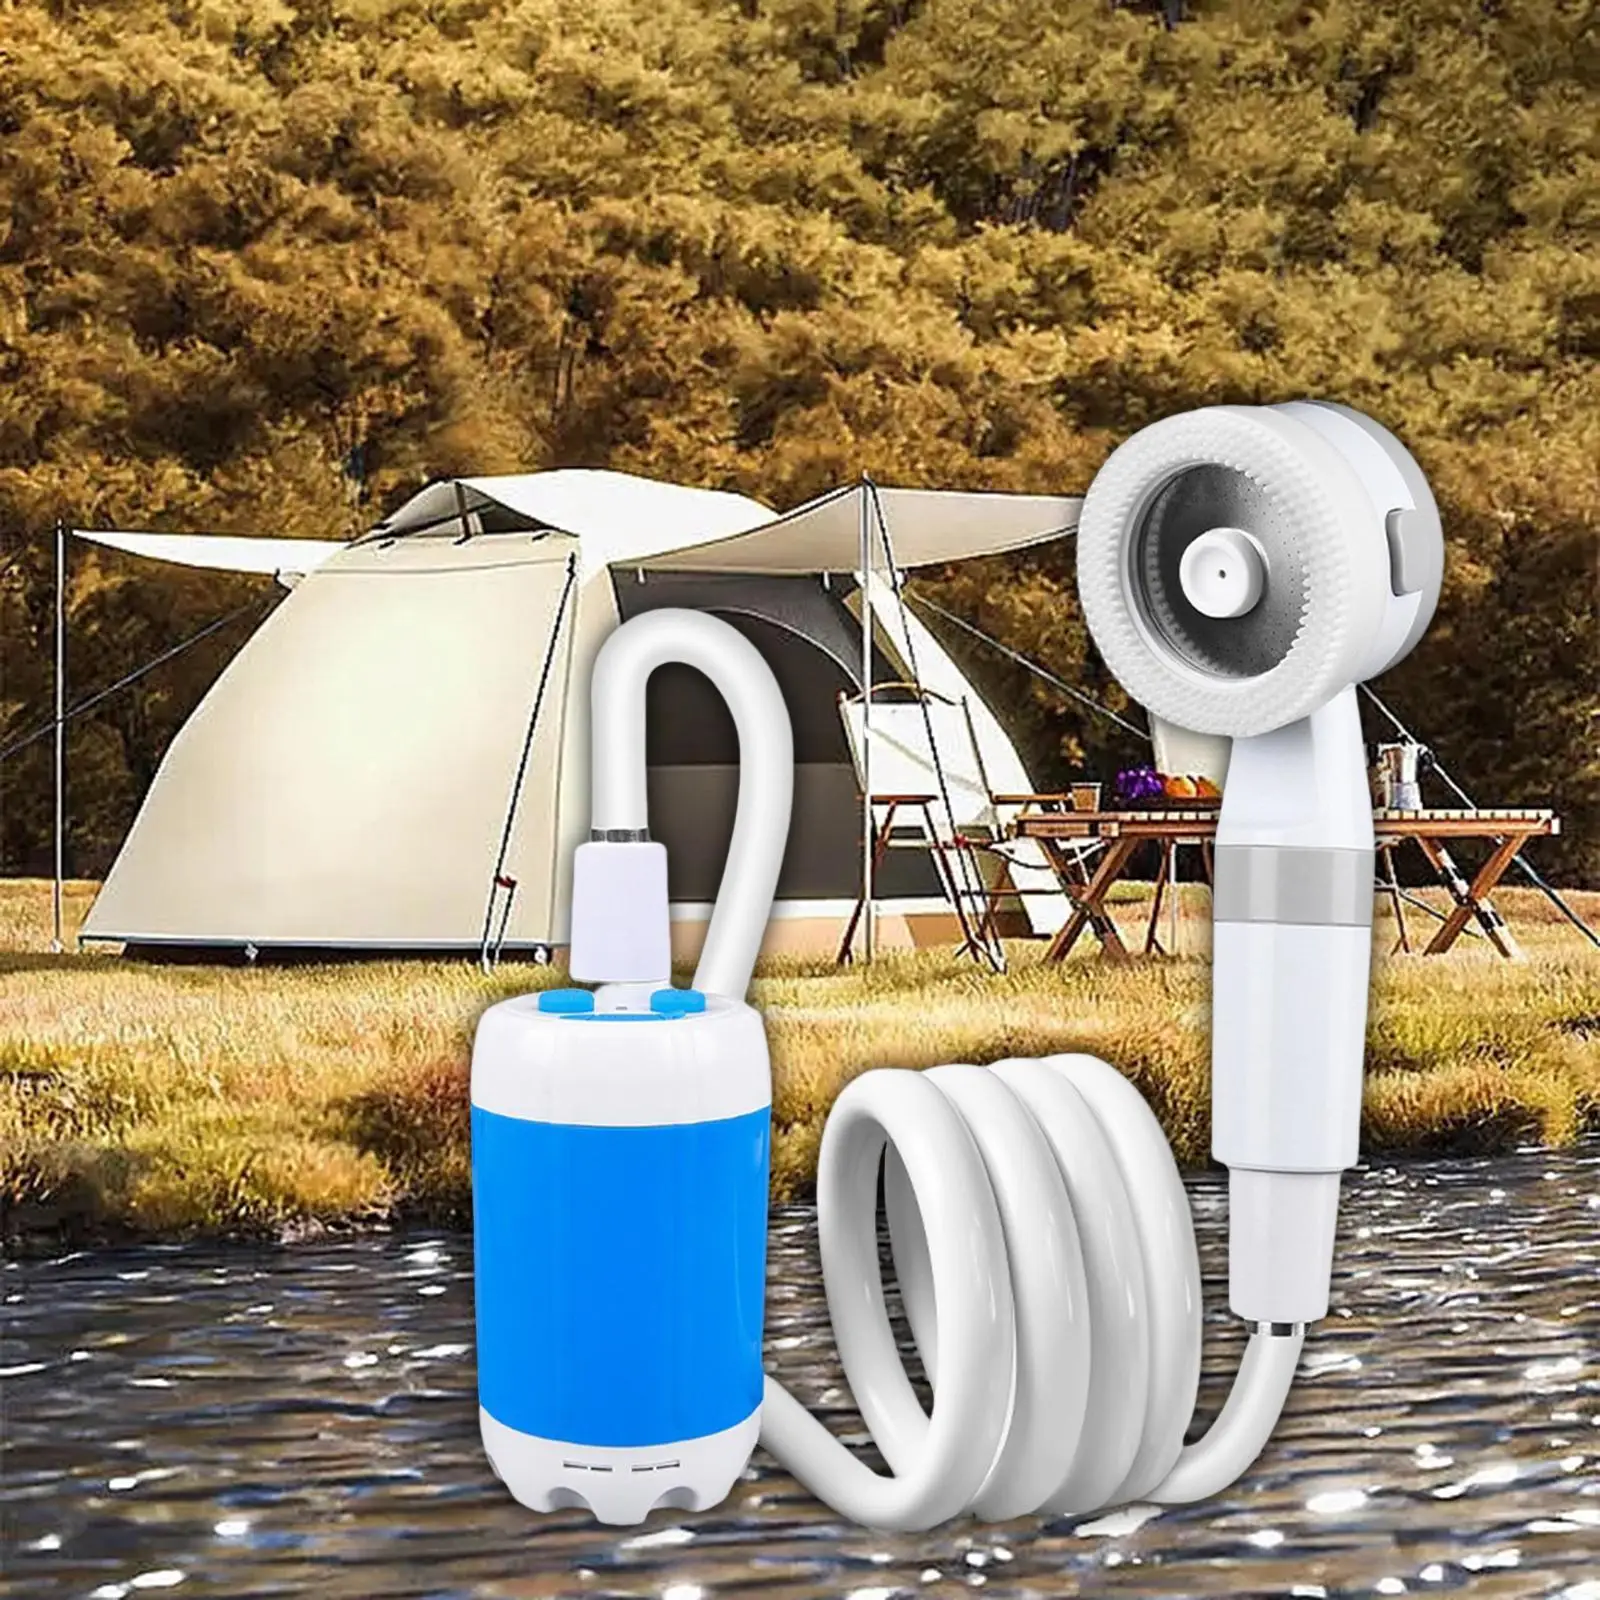 Portable Outdoor Shower Set Handheld Showerhead Camp Shower with Hose for Hiking Traveling Backpacking Gardening Plants Watering